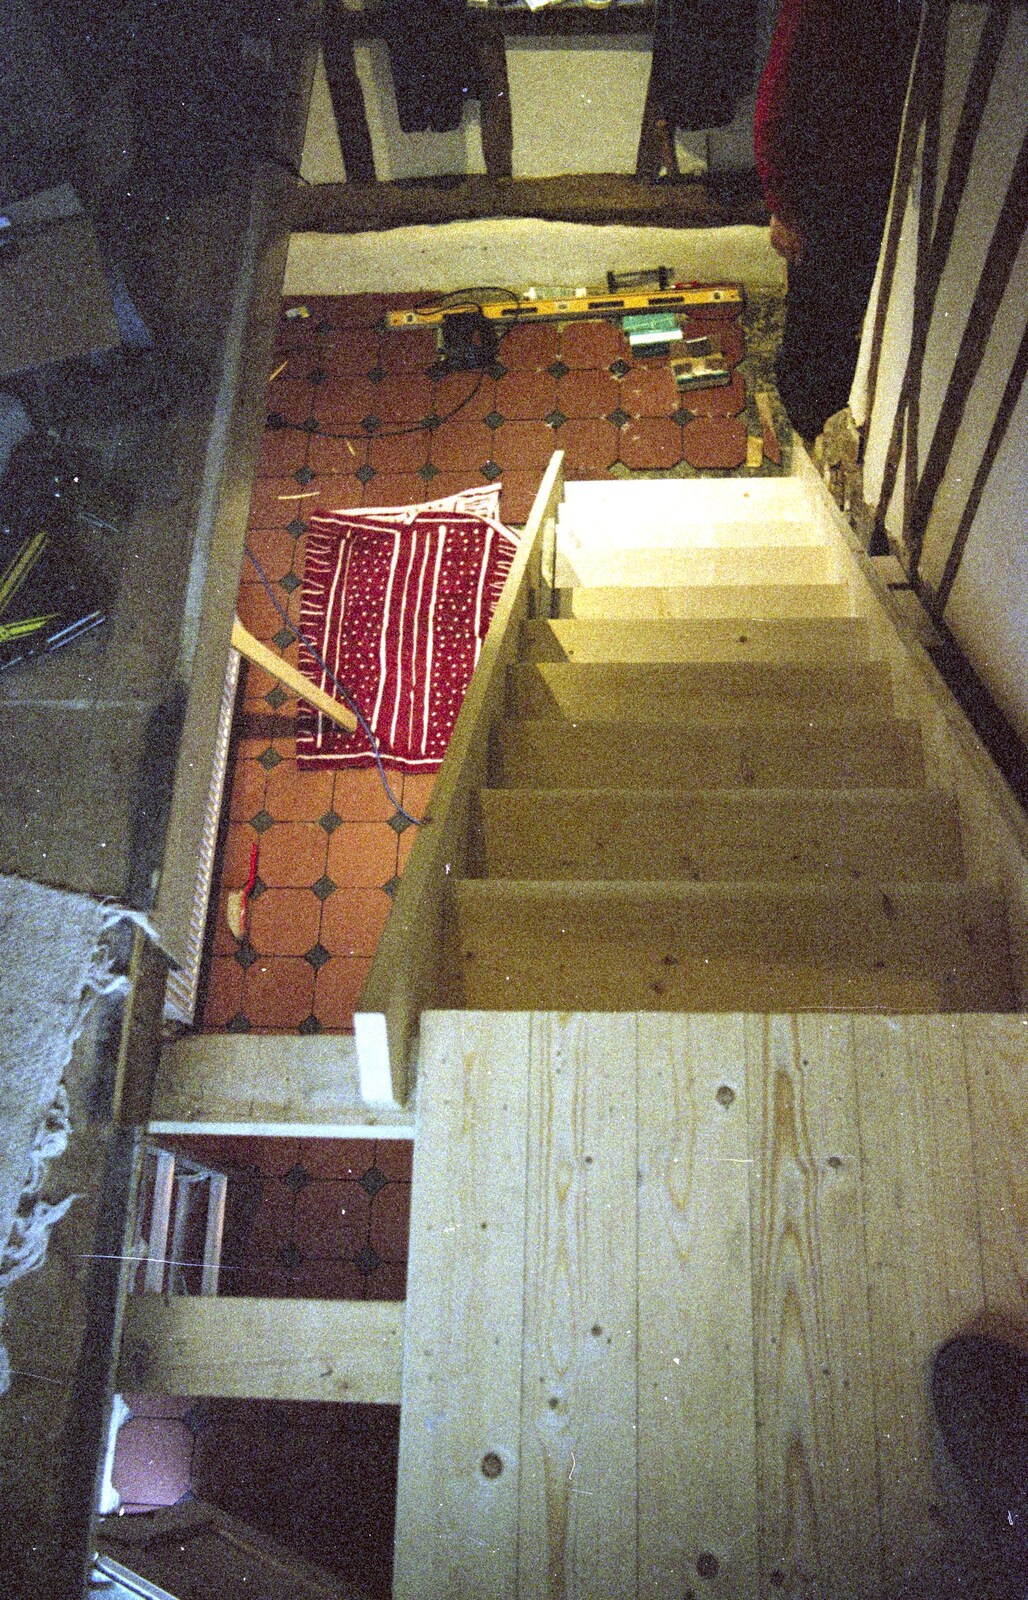 A view down the new staircase from 3G Lab, and Building a Staircase, Brome, Suffolk - 11th February 2001